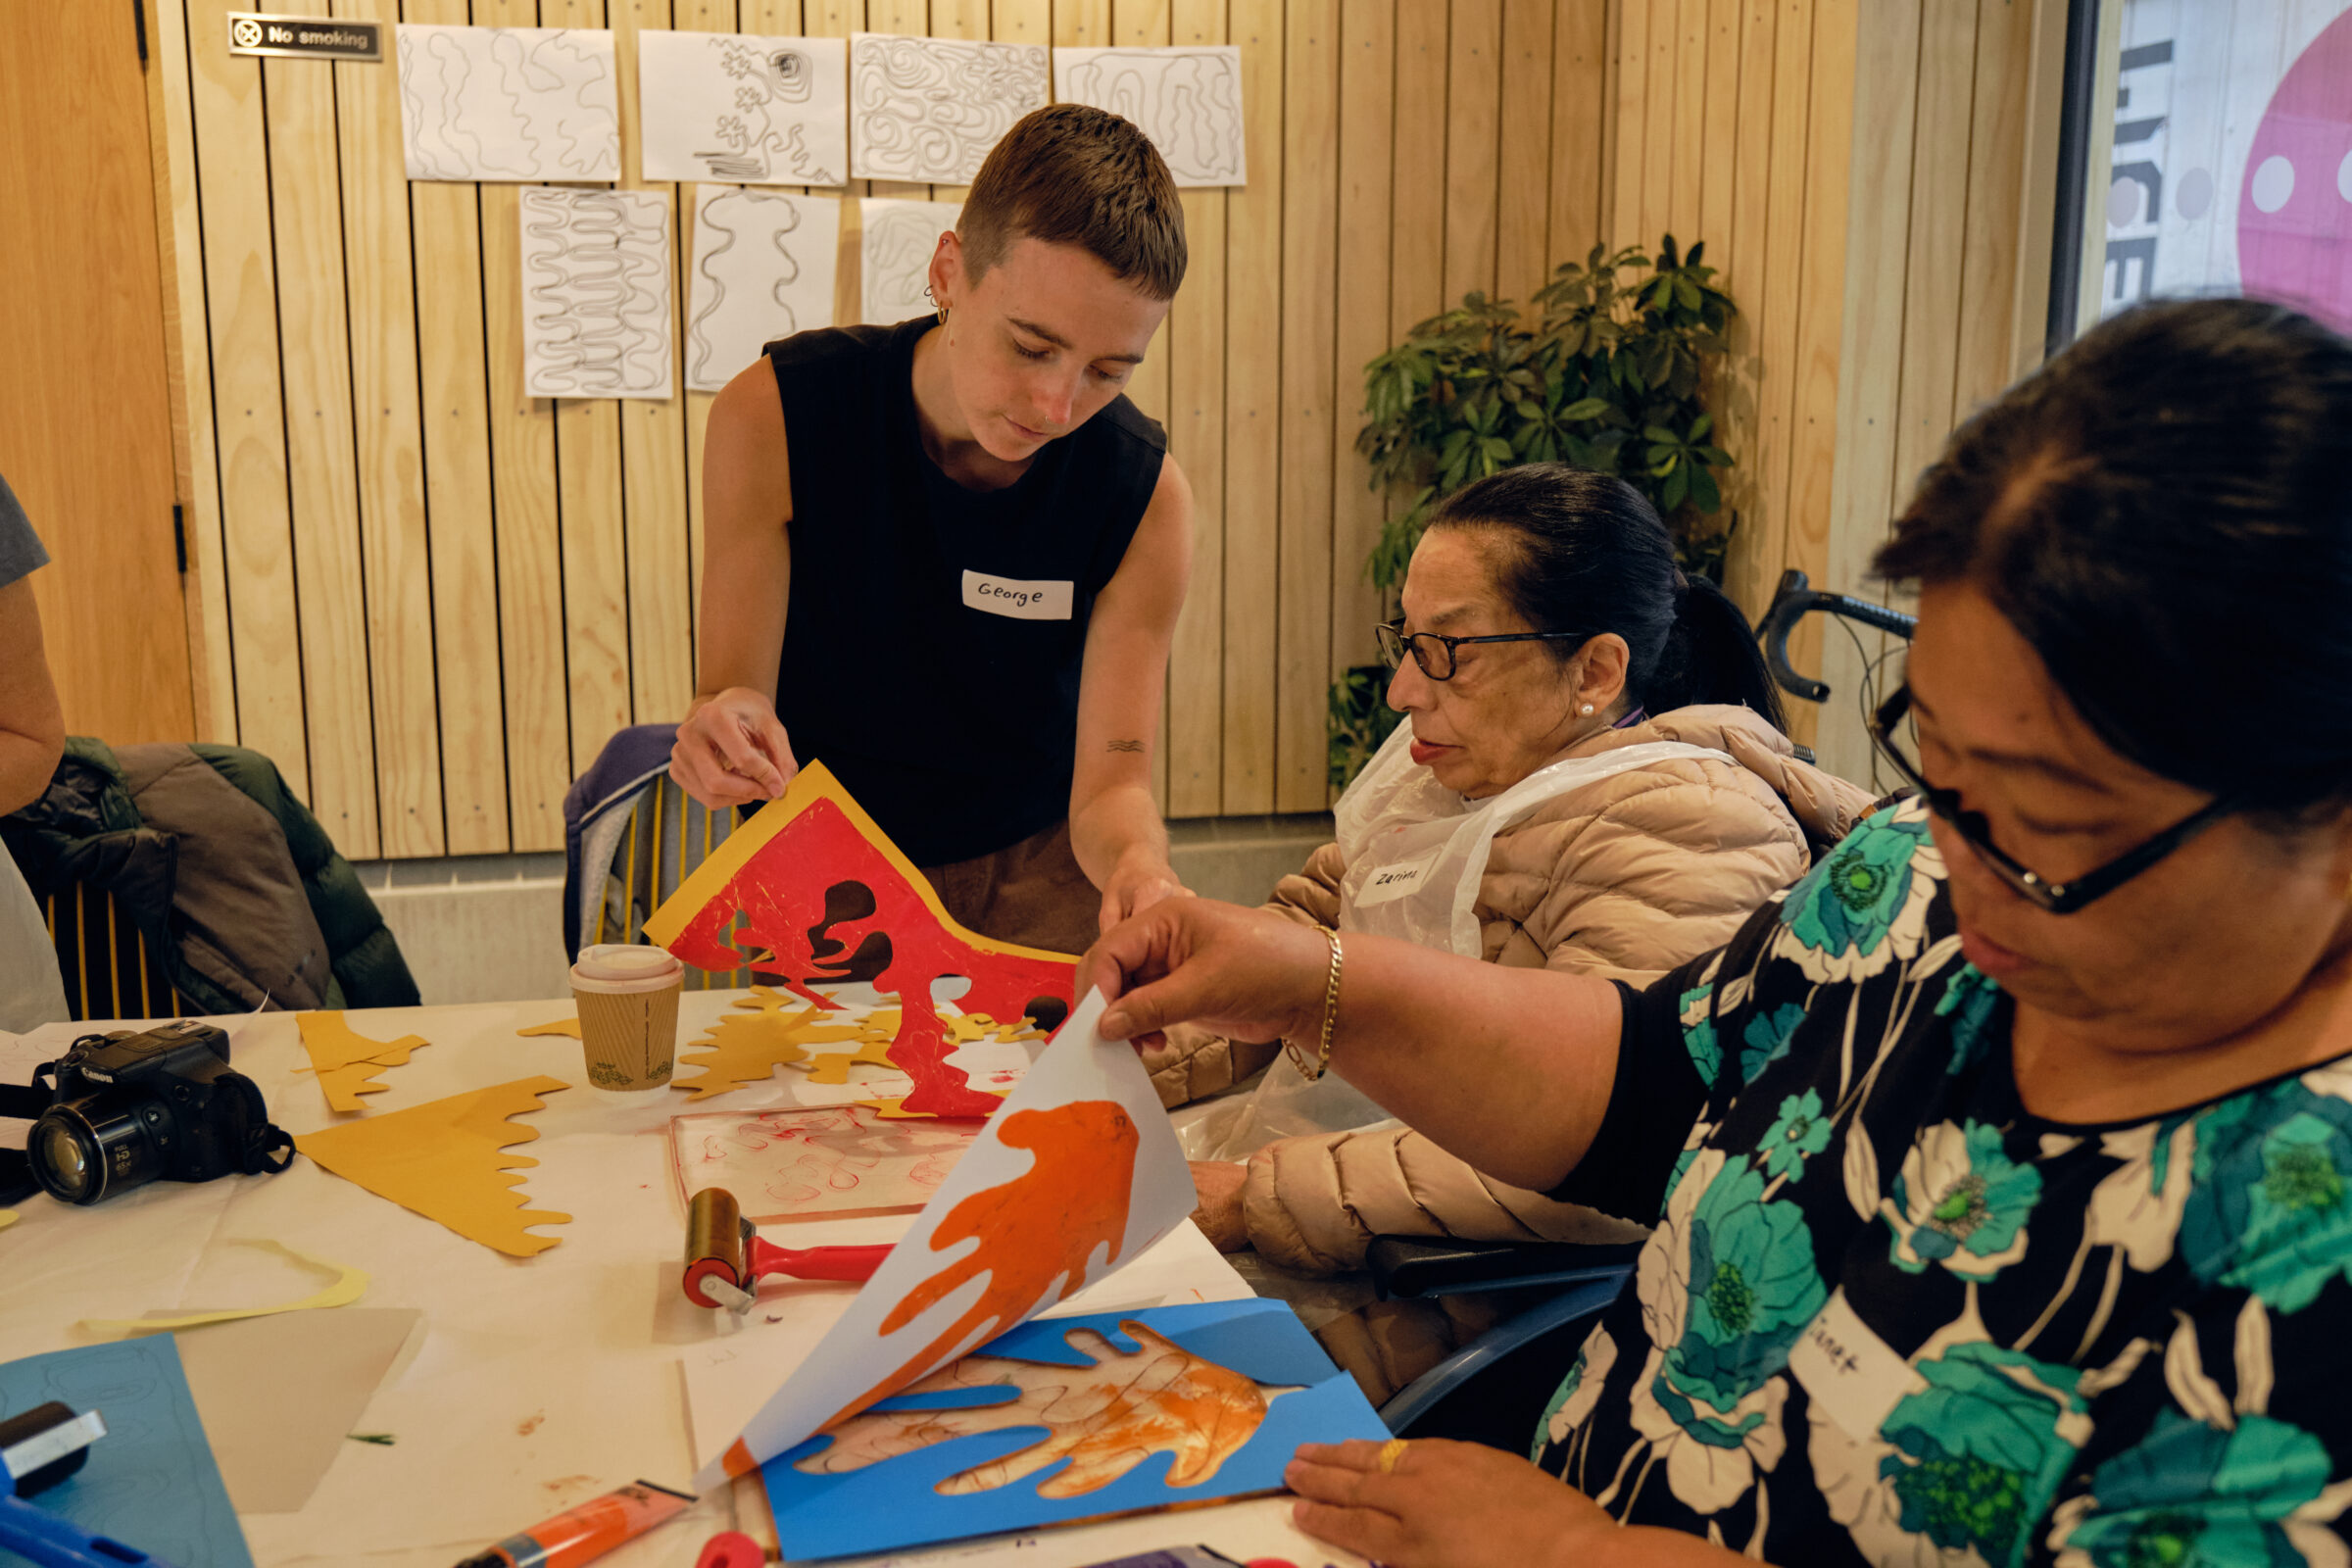 A young woman is standing and helping an older woman with cutting colourful paper into detailed shapes. Another woman has printed a shape and is seeing her new art.